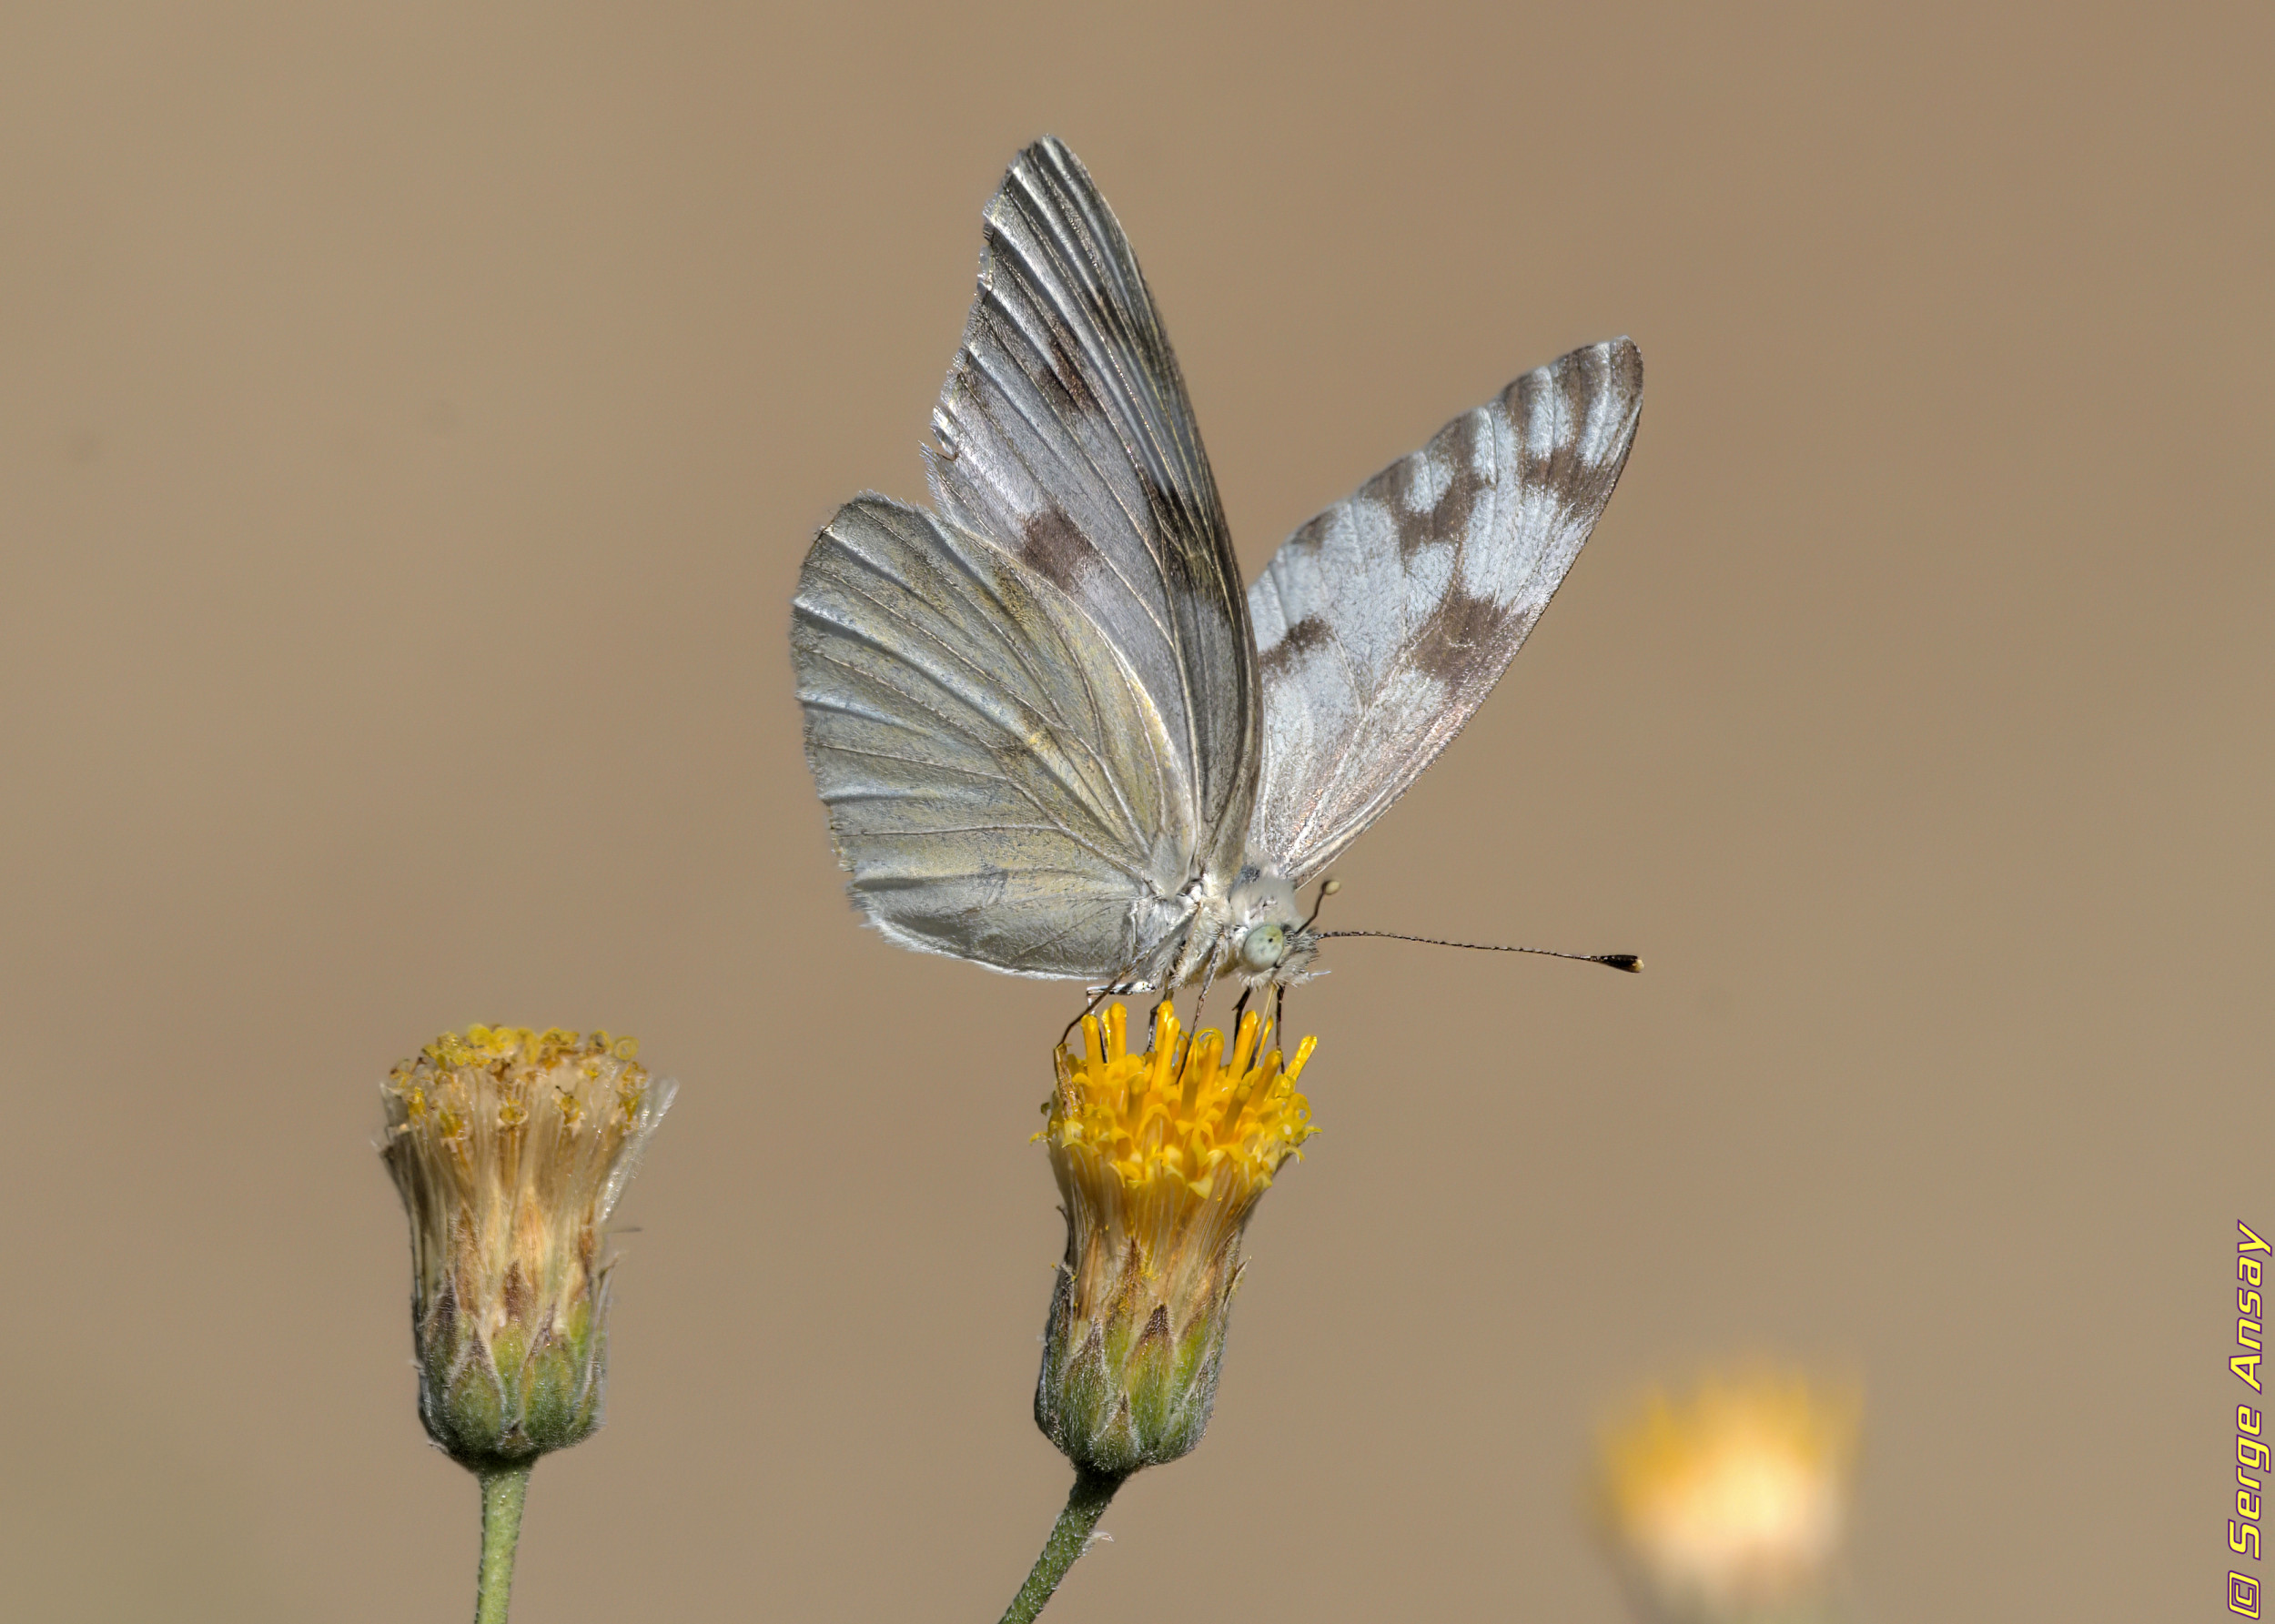 Pontia protodice, common name: checkered white or southern cabbage butterfly